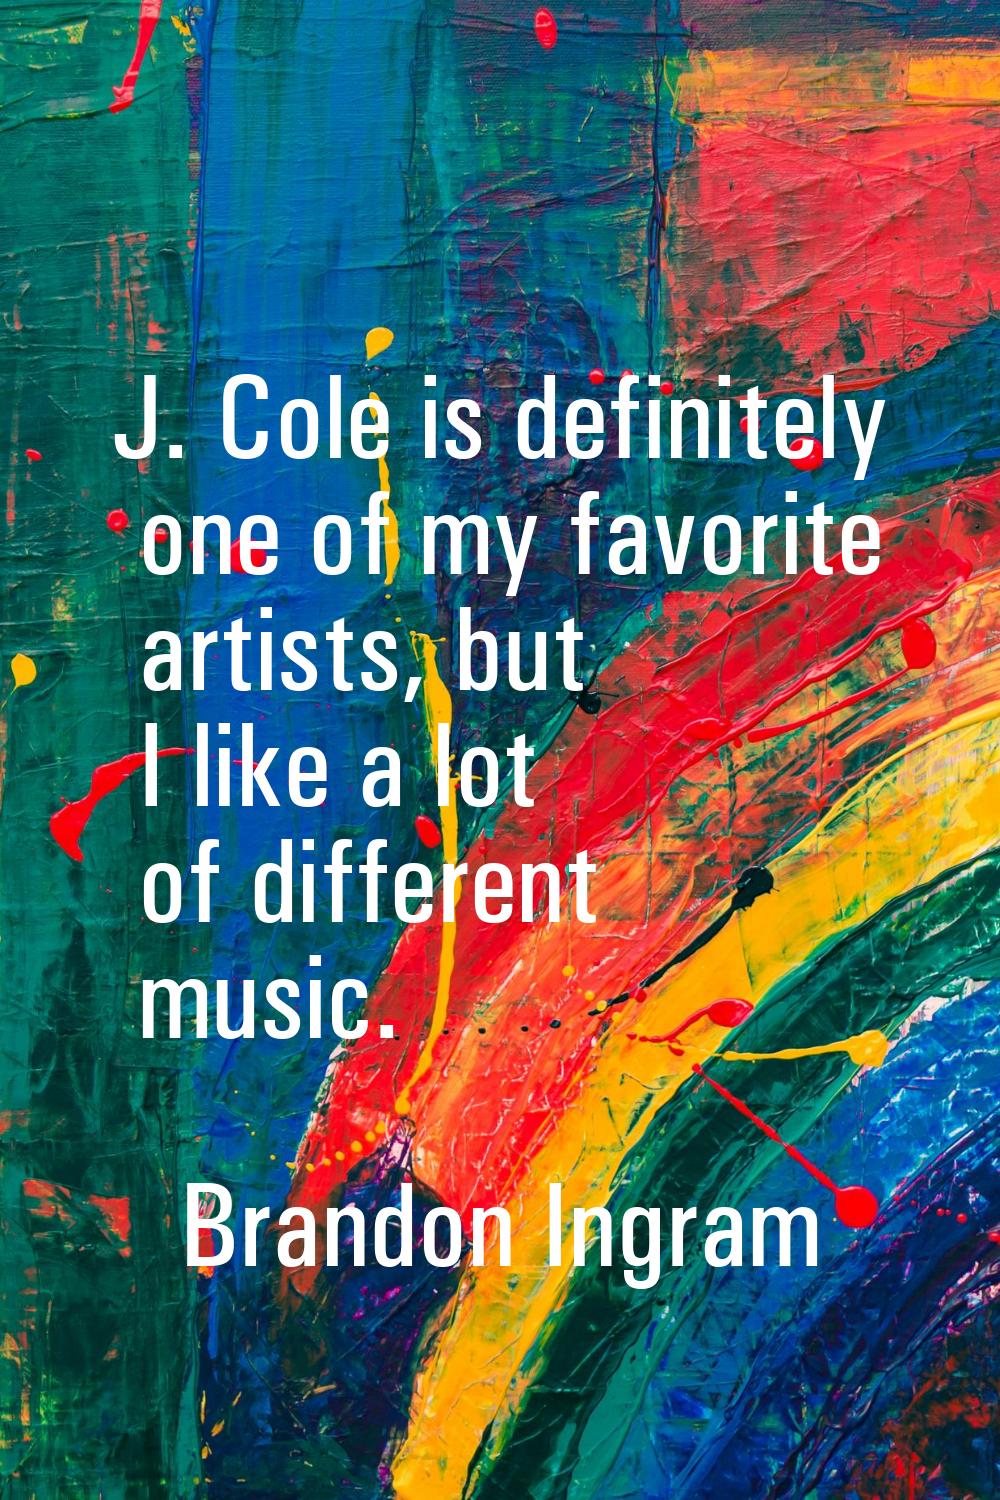 J. Cole is definitely one of my favorite artists, but I like a lot of different music.